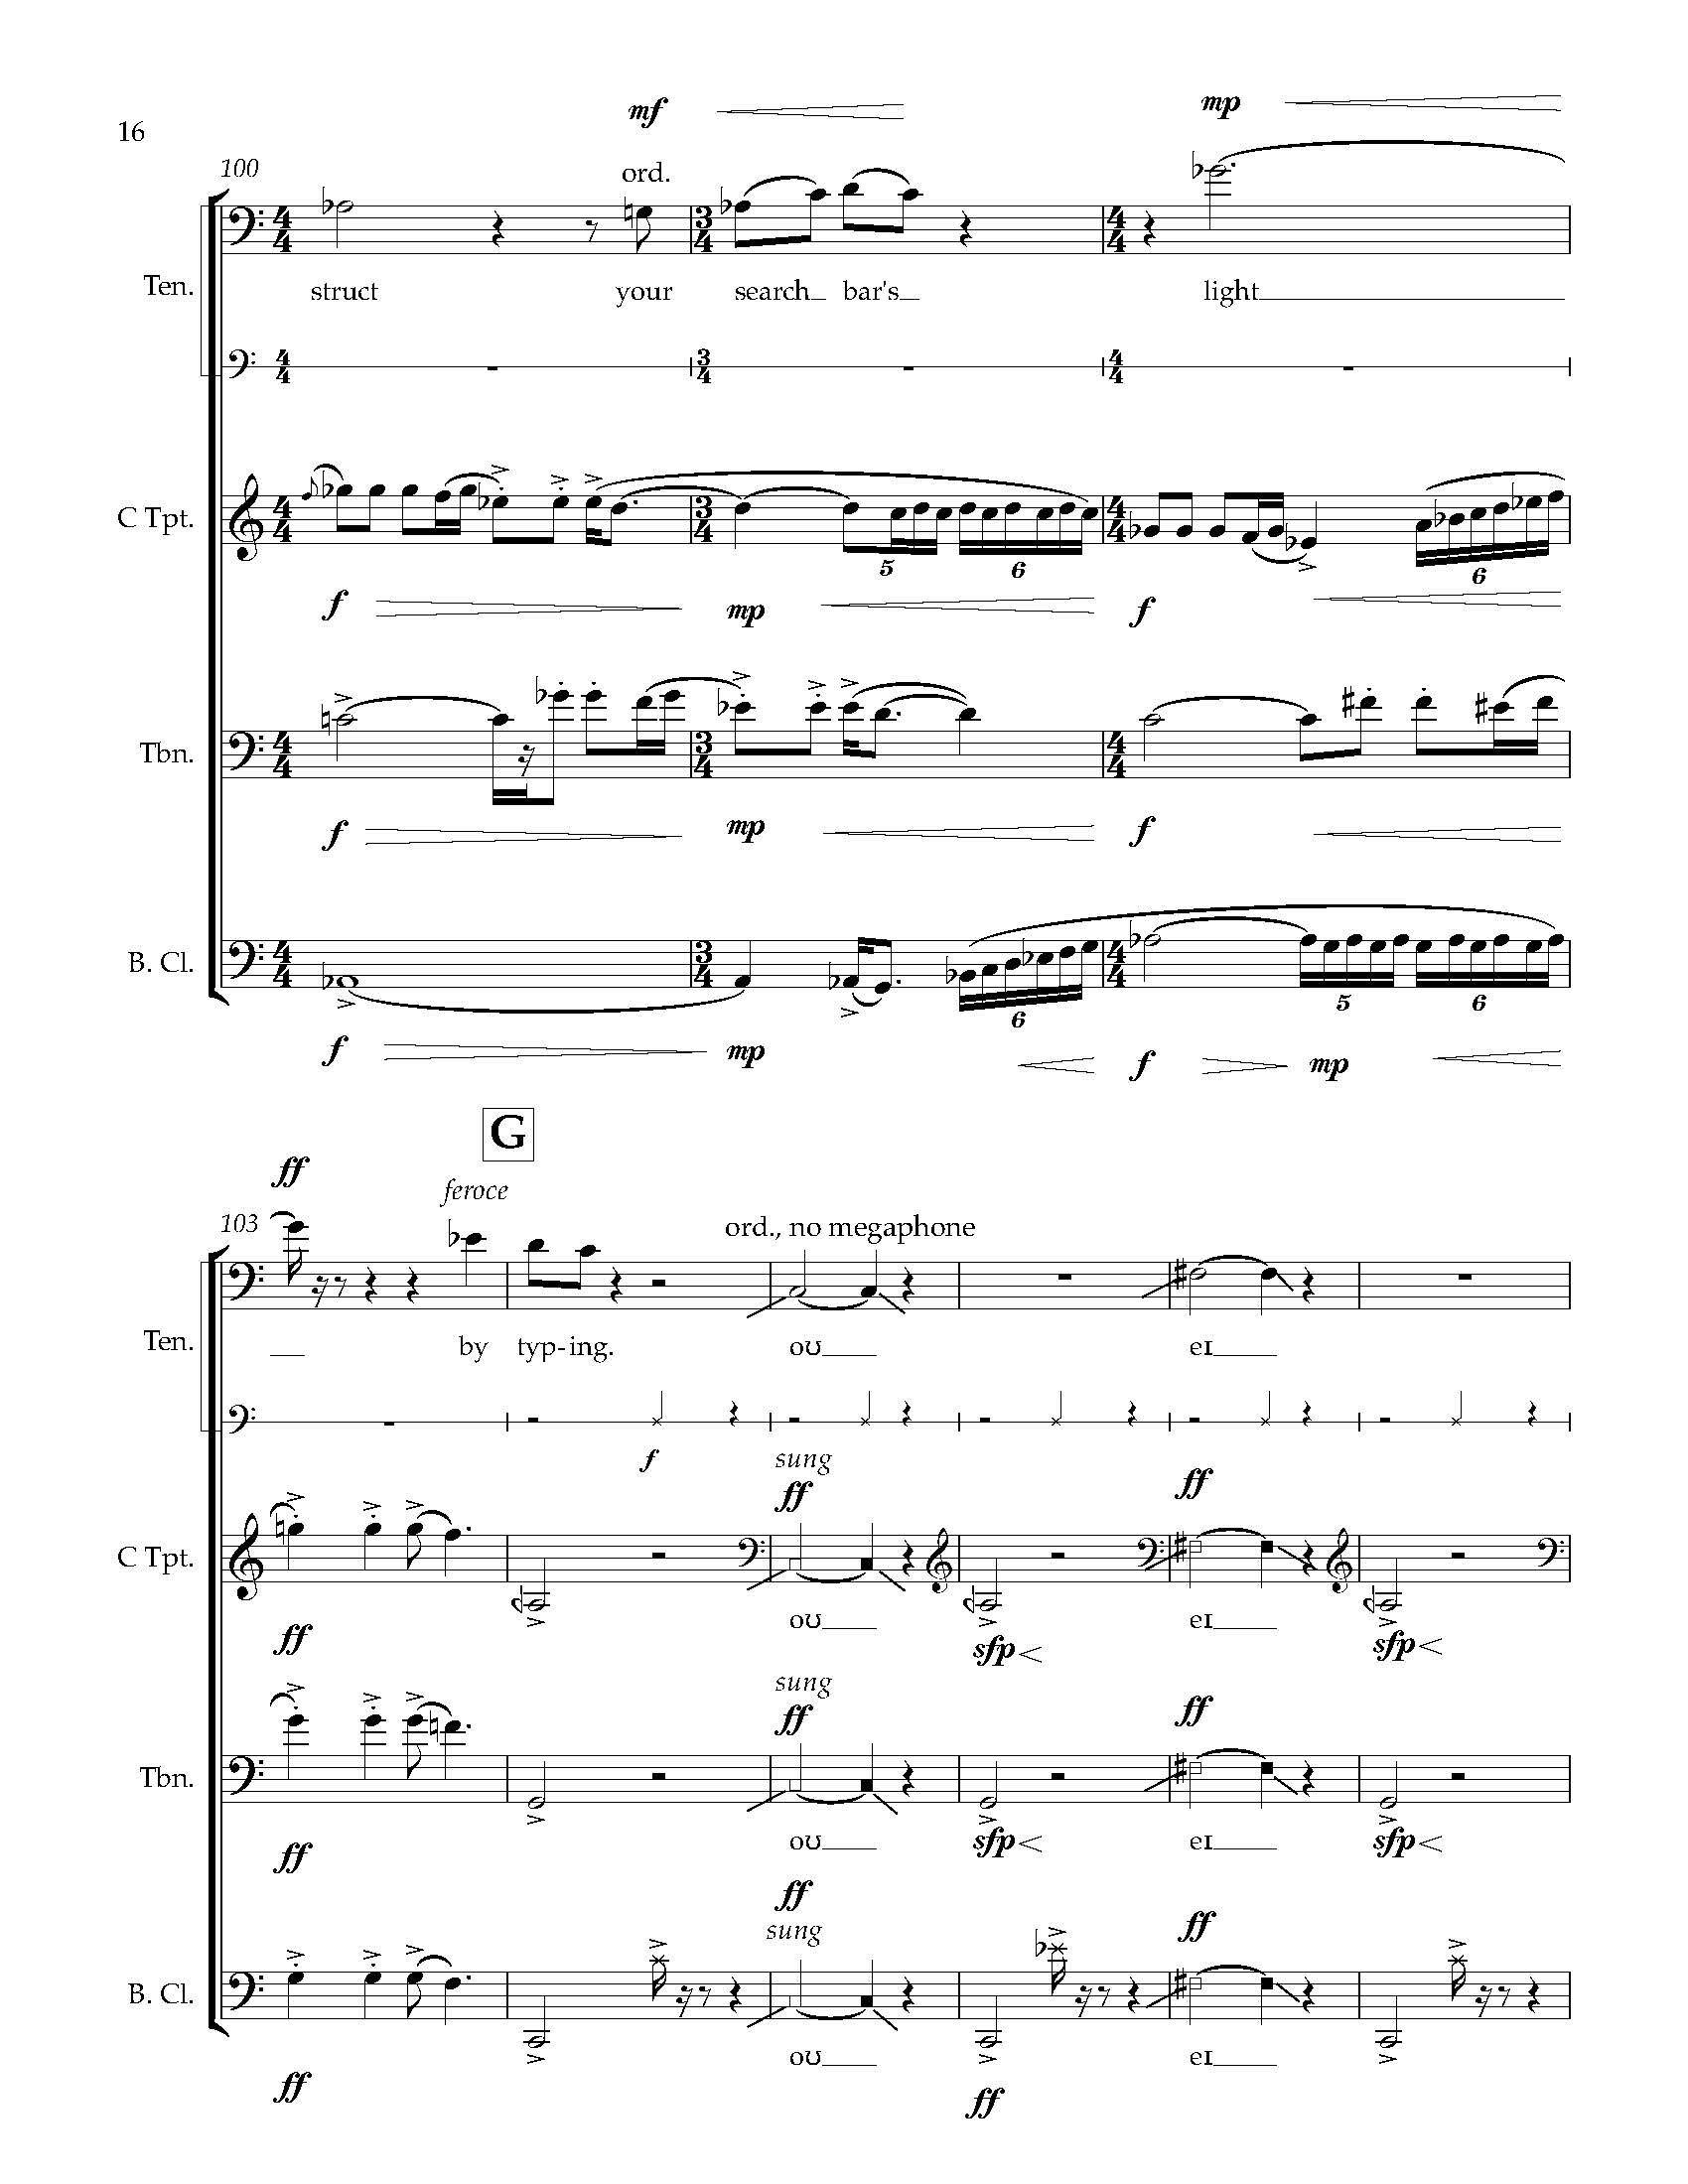 Many Worlds [1] - Complete Score_Page_25.jpg